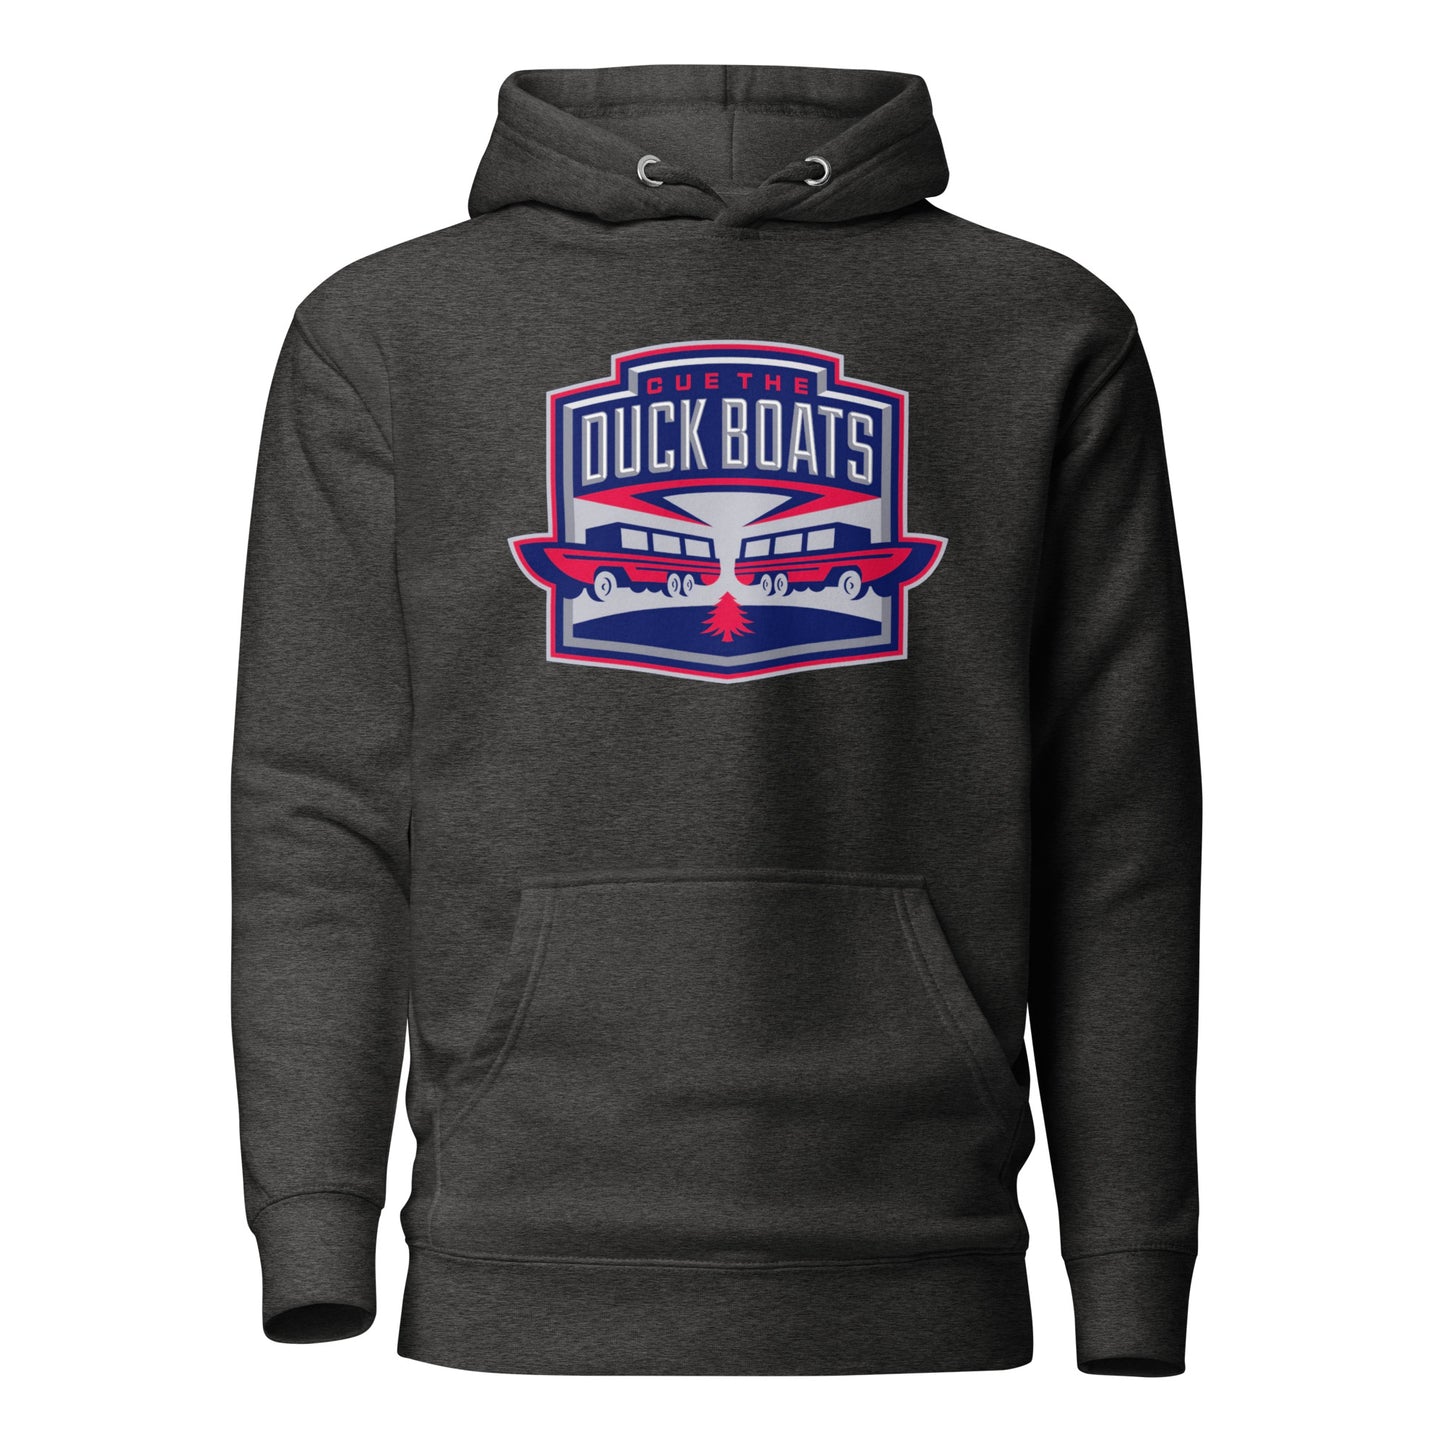 Cue The Duck Boats Hoodie